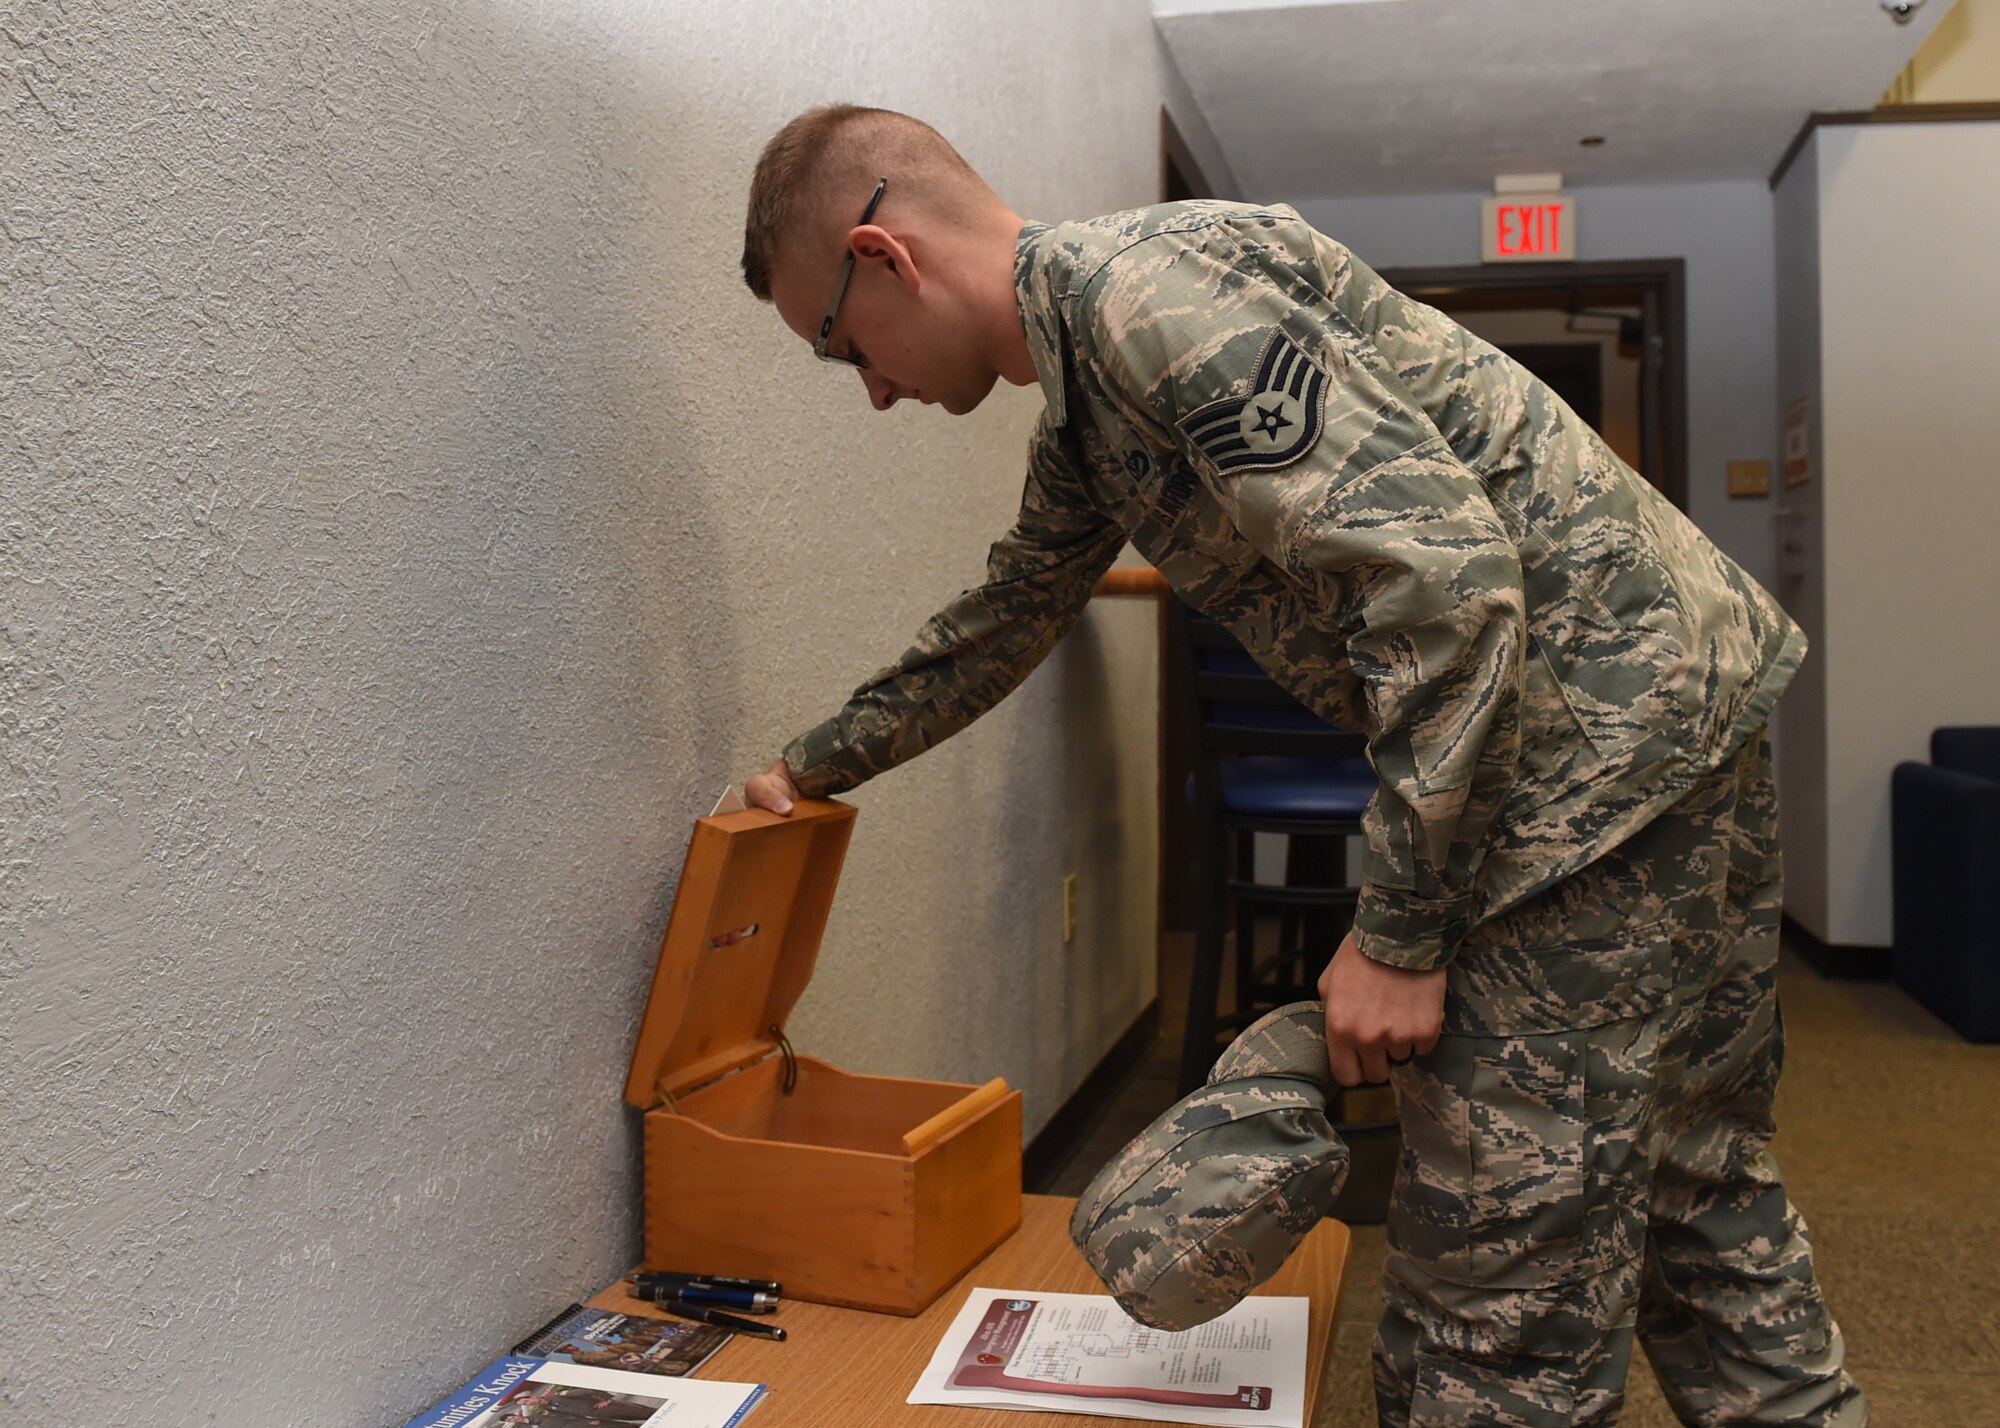 U.S. Air Force Staff Sgt. William Harrison, 97th Civil Engineer Squadron Airmen dorm leader, checks for workorders in the dayroom of dormitory 333, June 29, 2017, at Altus Air Force Base, Oklahoma. Dorm management works to improve dorm quality of life for the first-term Airmen living on base by preforming multiple tasks to maintain the longevity of the Altus AFB dorms. (U.S. Air Force Photo by Airman 1st Class Jackson N. Haddon/Released).